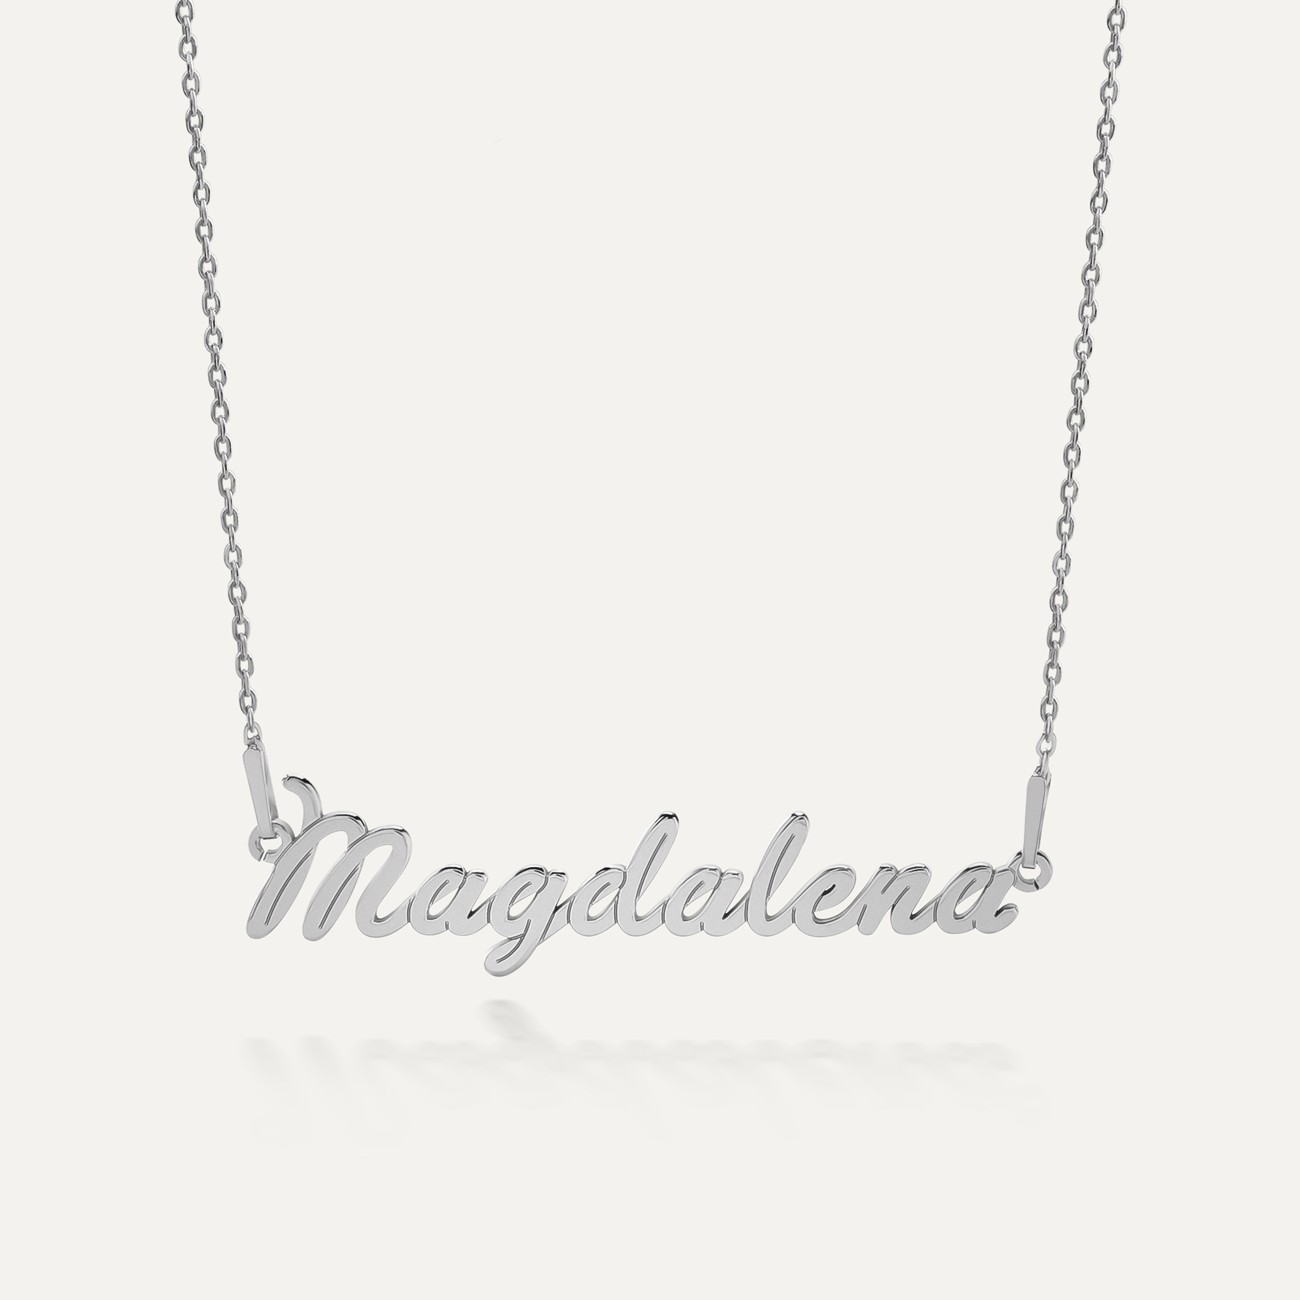 SIMPLE STYLE NAME NECKLACE, RHODIUM OR 24K / 18K GOLD PLATED